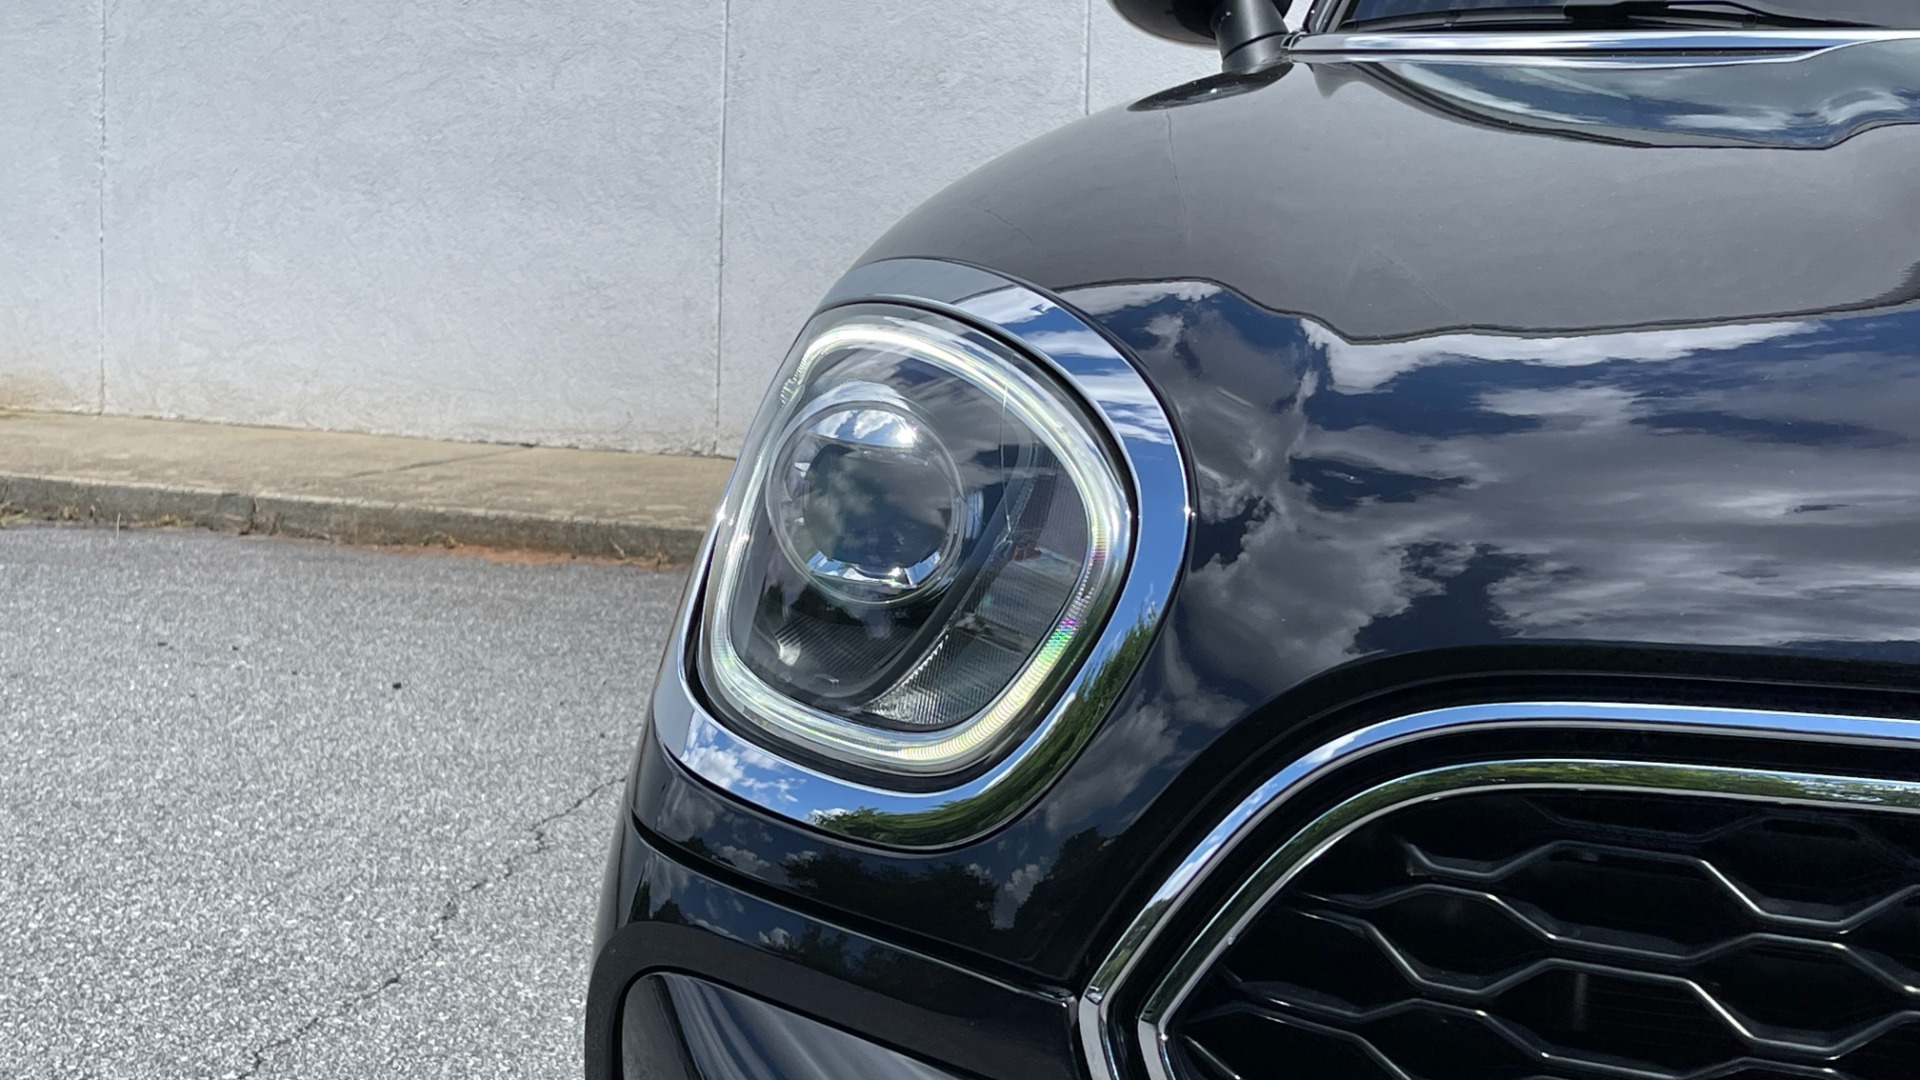 Used 2019 MINI Countryman Cooper S / ICONIC TRIM / TOUCHSCREEN NAV /SPORT AUTO / CONVENIENCE for sale $33,295 at Formula Imports in Charlotte NC 28227 52